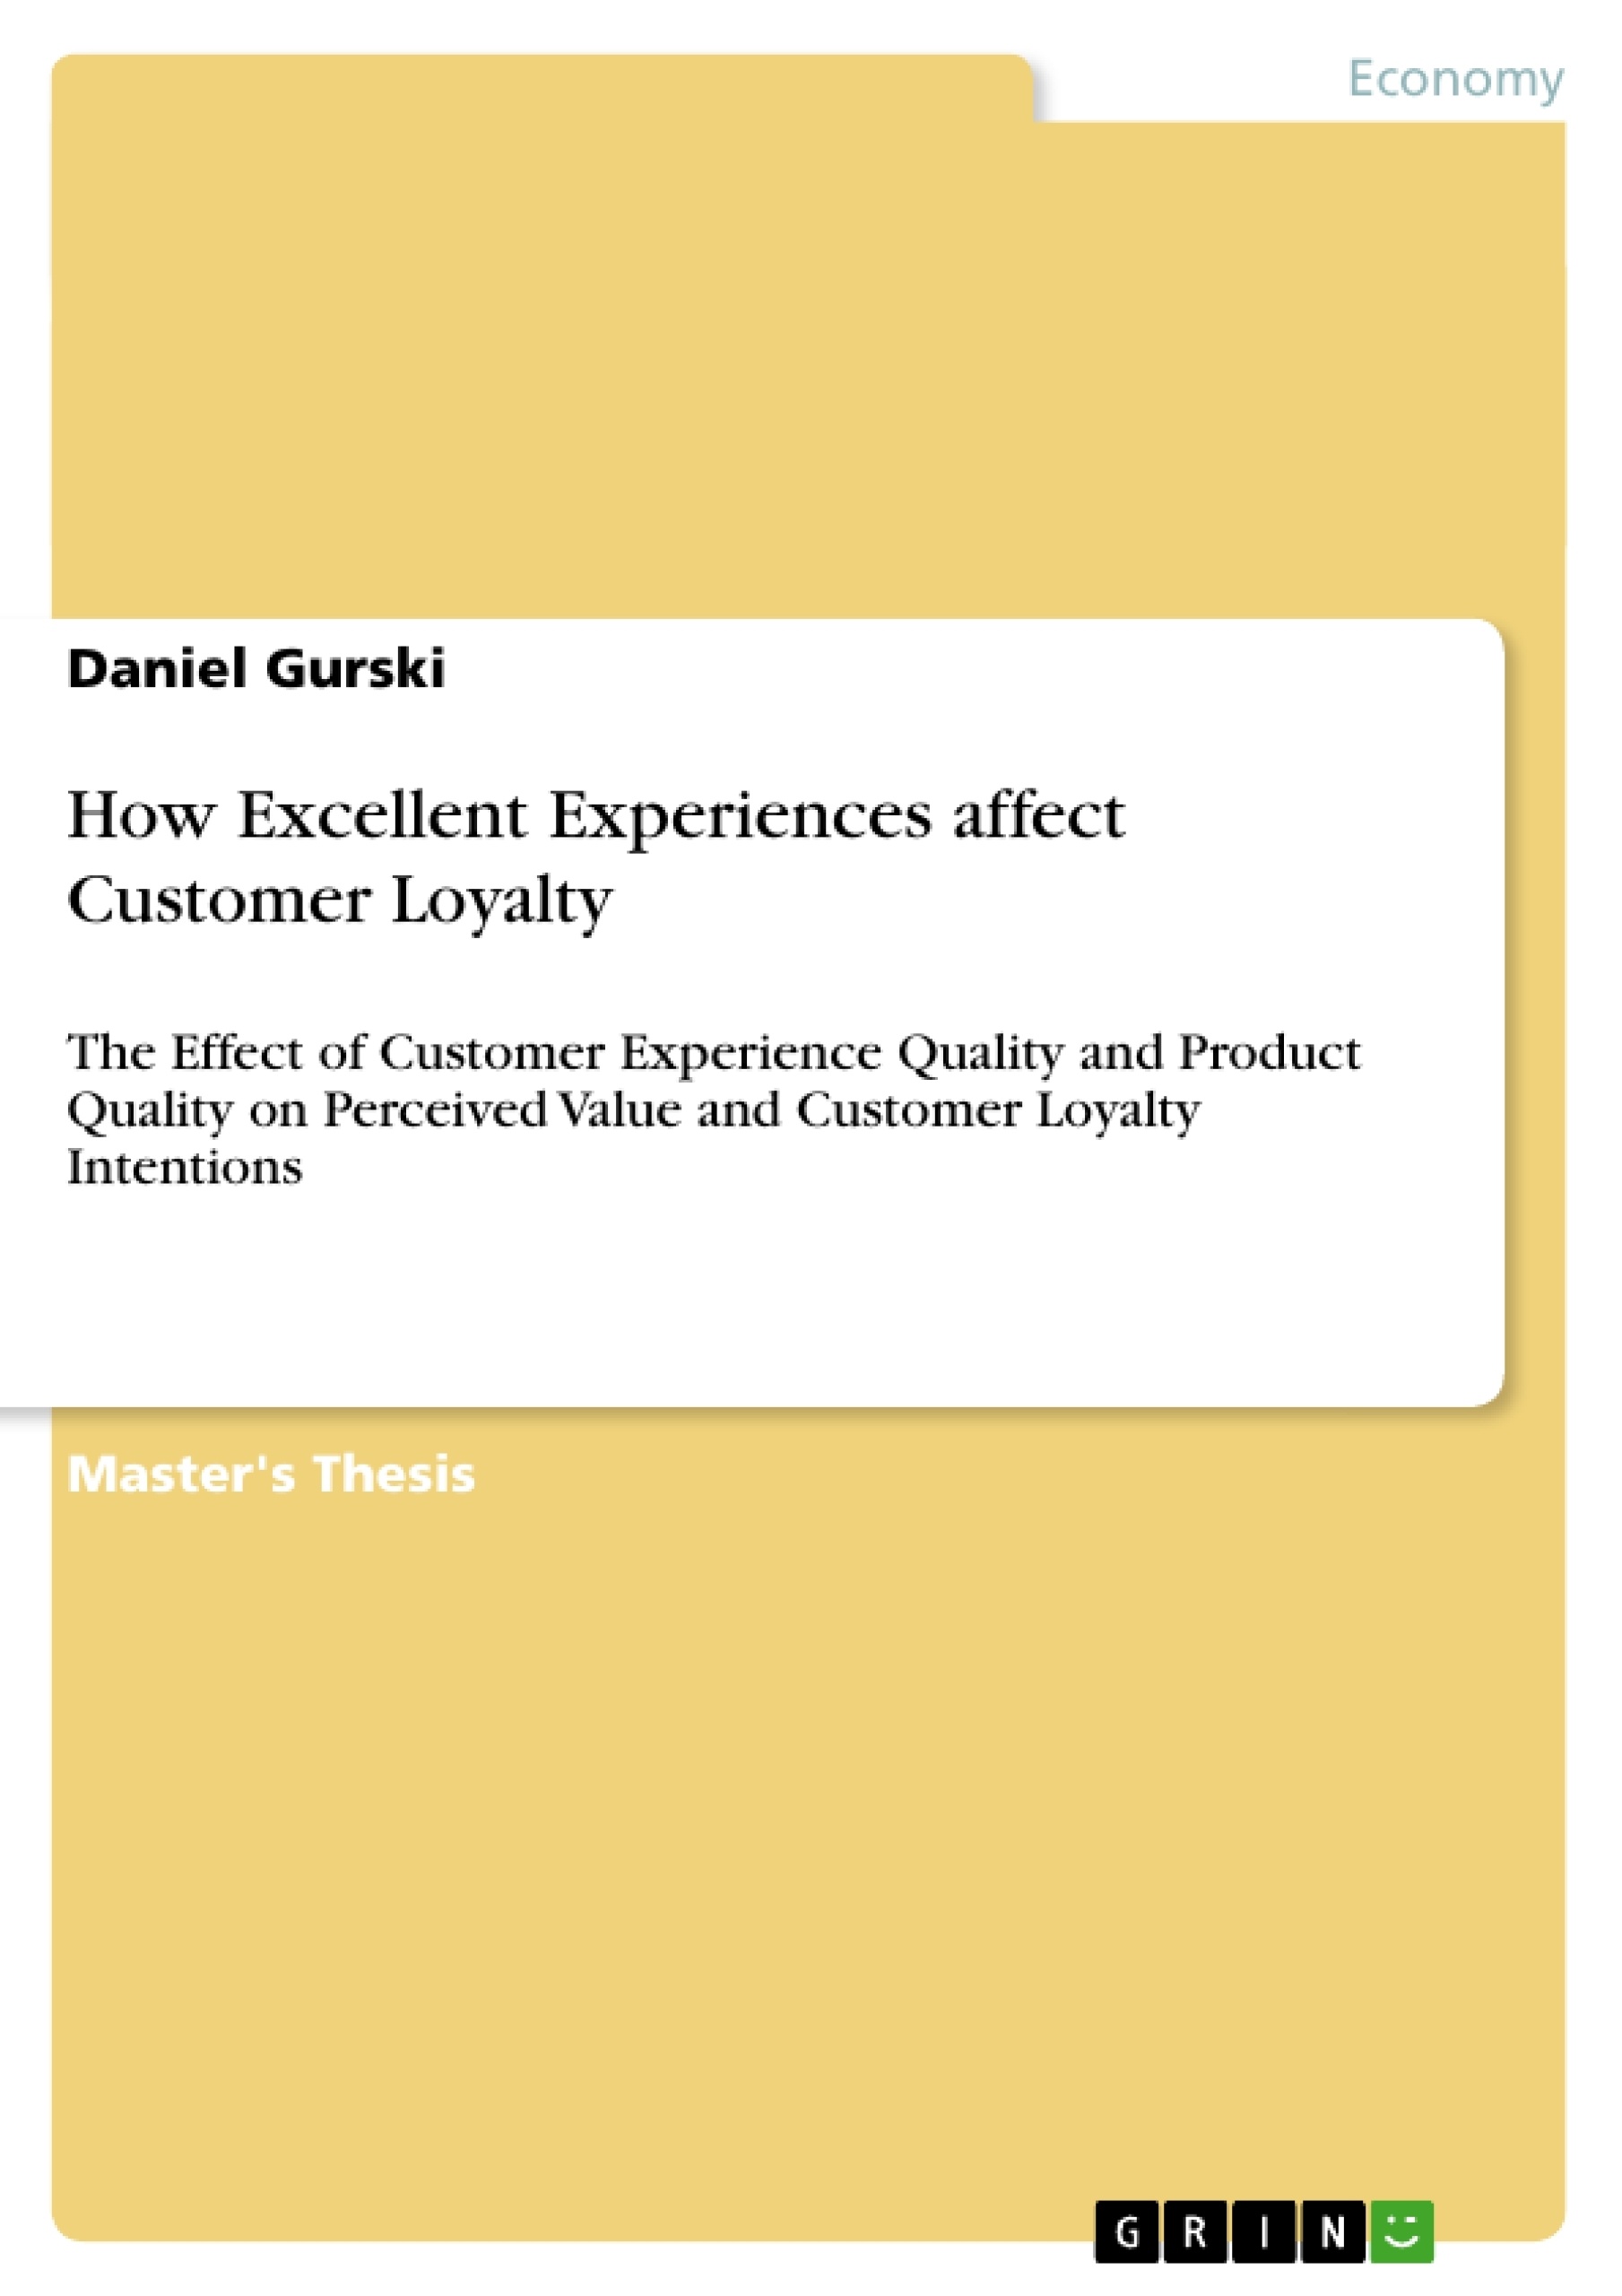 Title: How Excellent Experiences affect Customer Loyalty